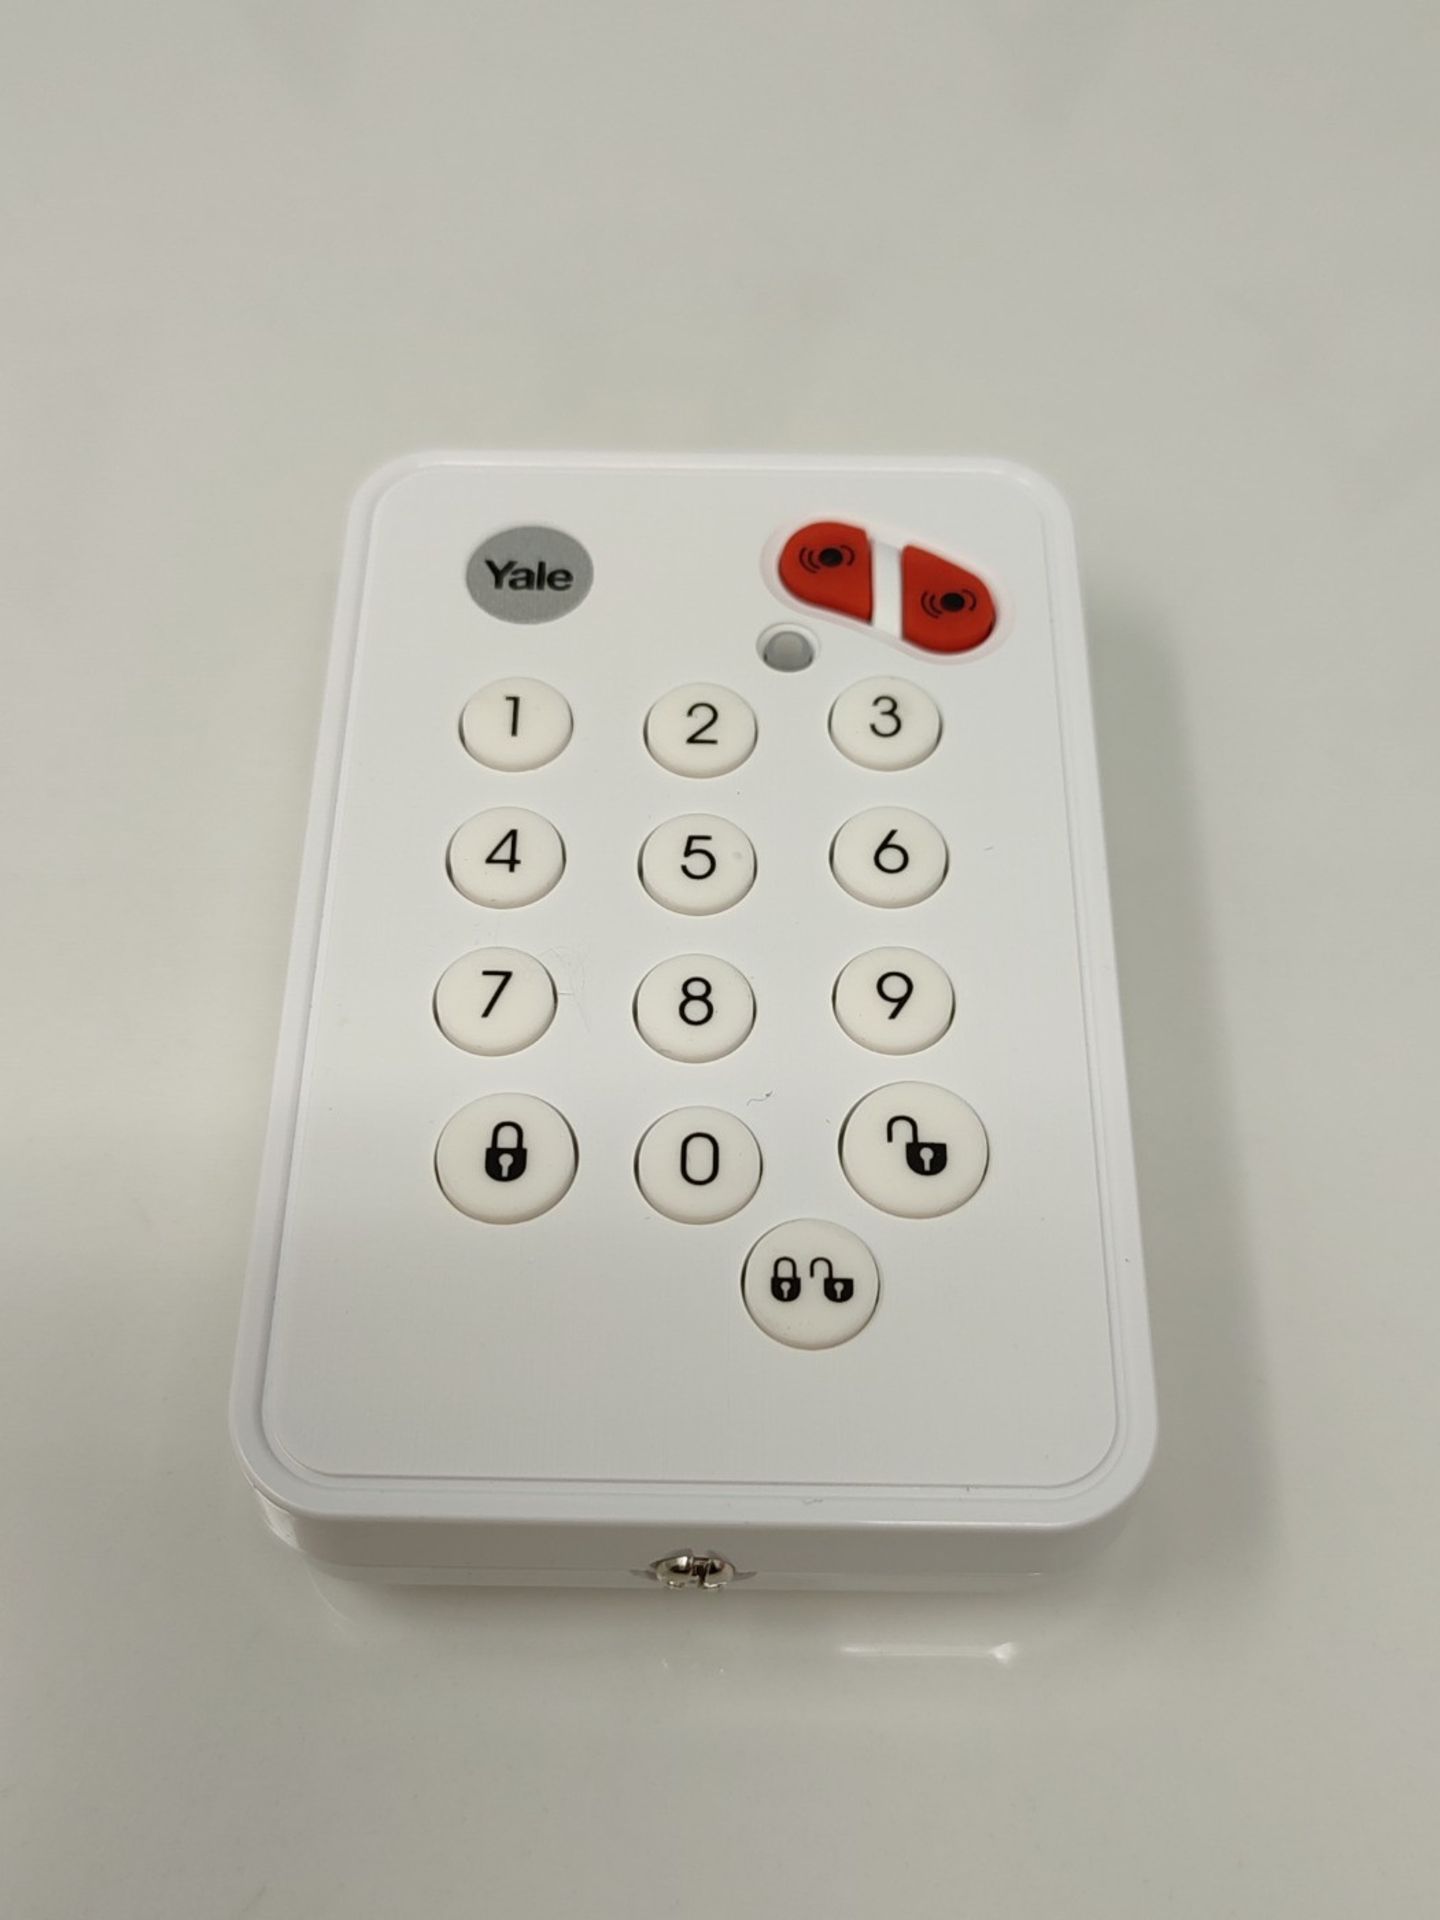 Yale EF-KP Easy Fit Alarm Remote Keypad, White, Accessory for SR & EF Alarms - Image 3 of 3